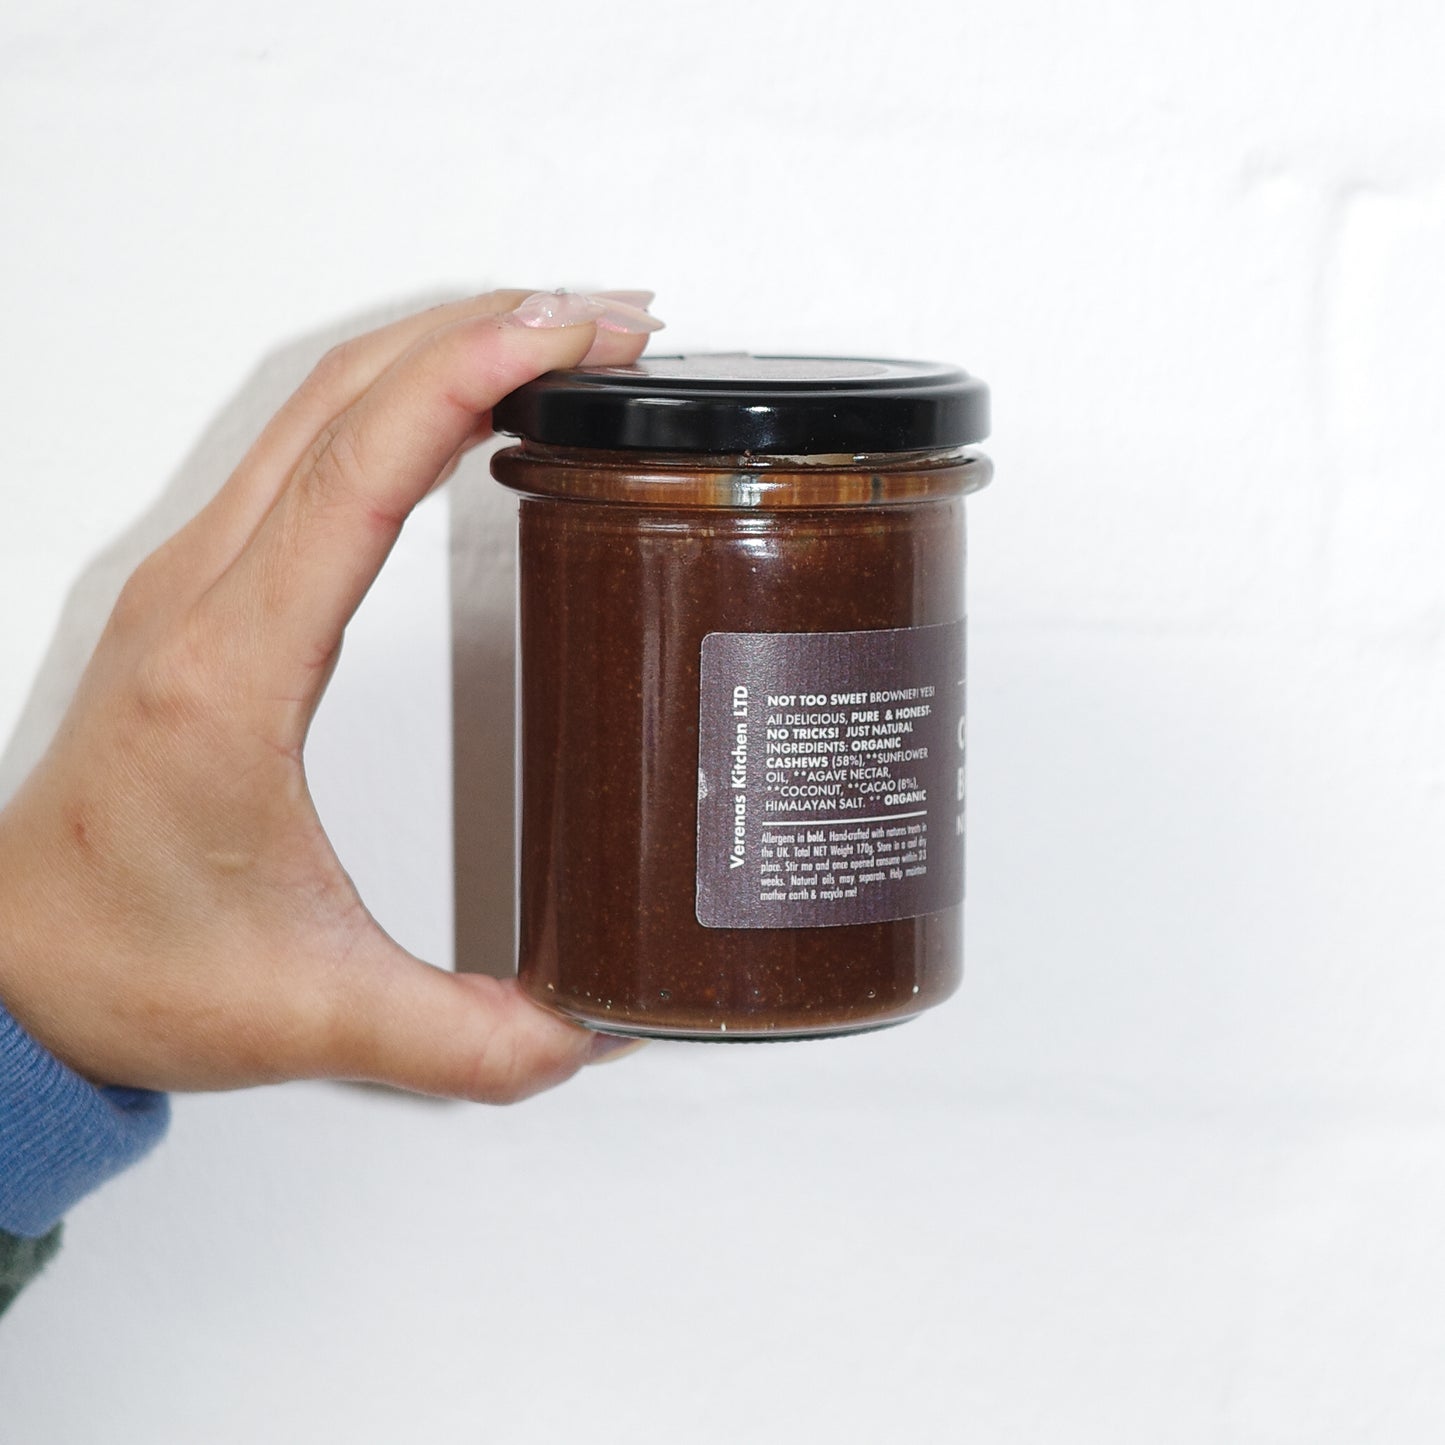 Organic Chocolate Brownie Nut Butter